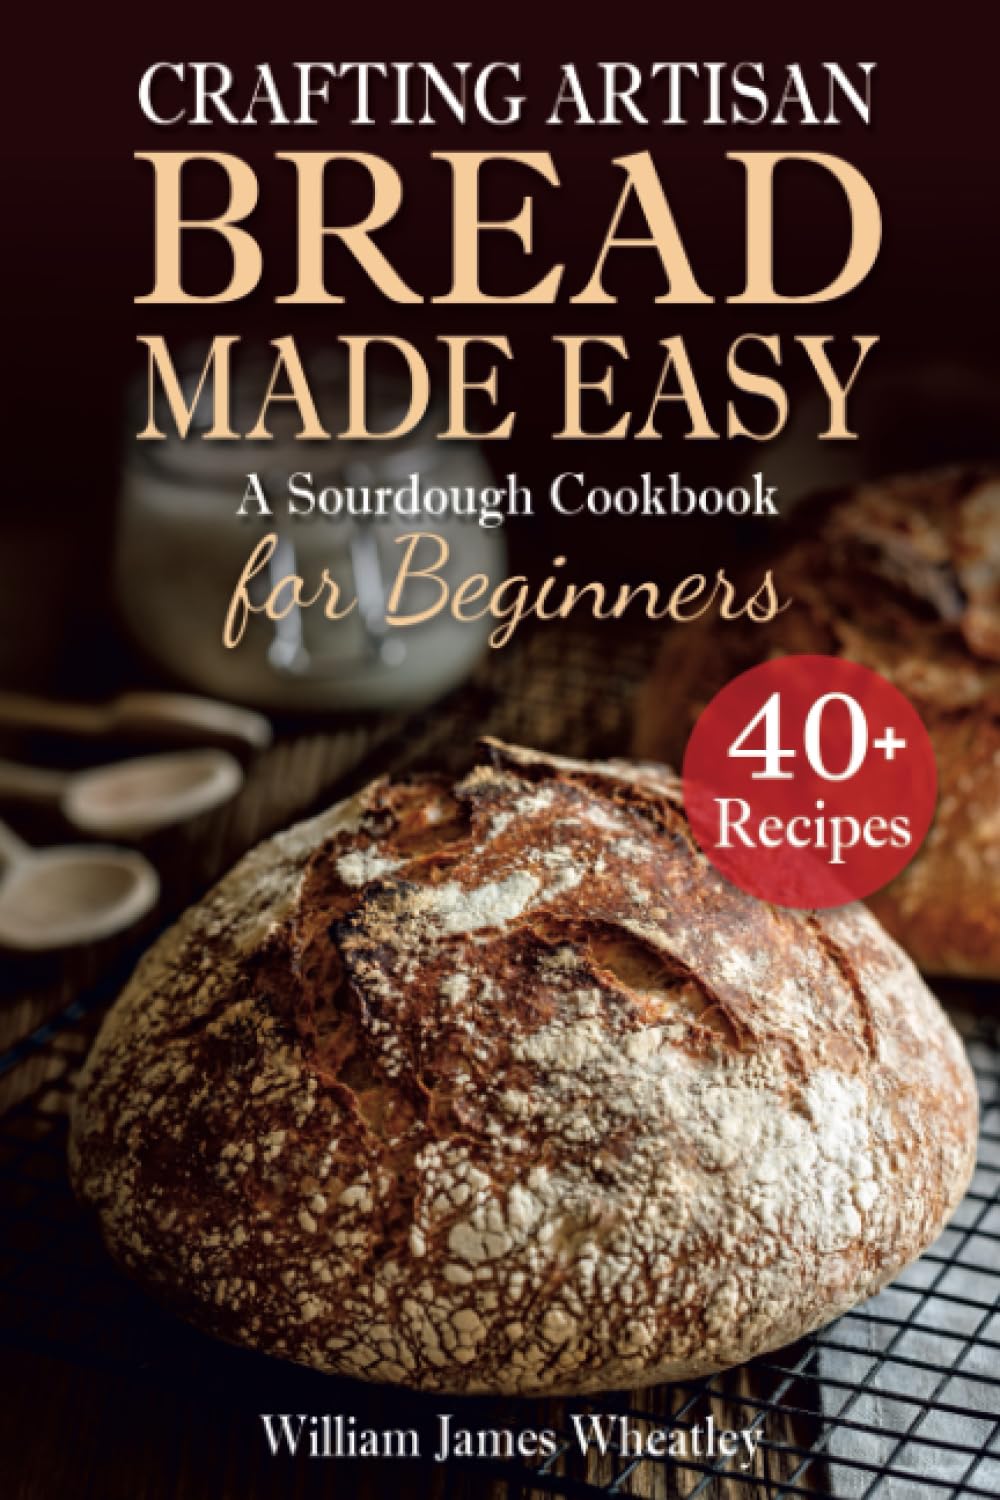 Crafting Artisan Bread Made Easy: A Sourdough Cookbook for Beginners